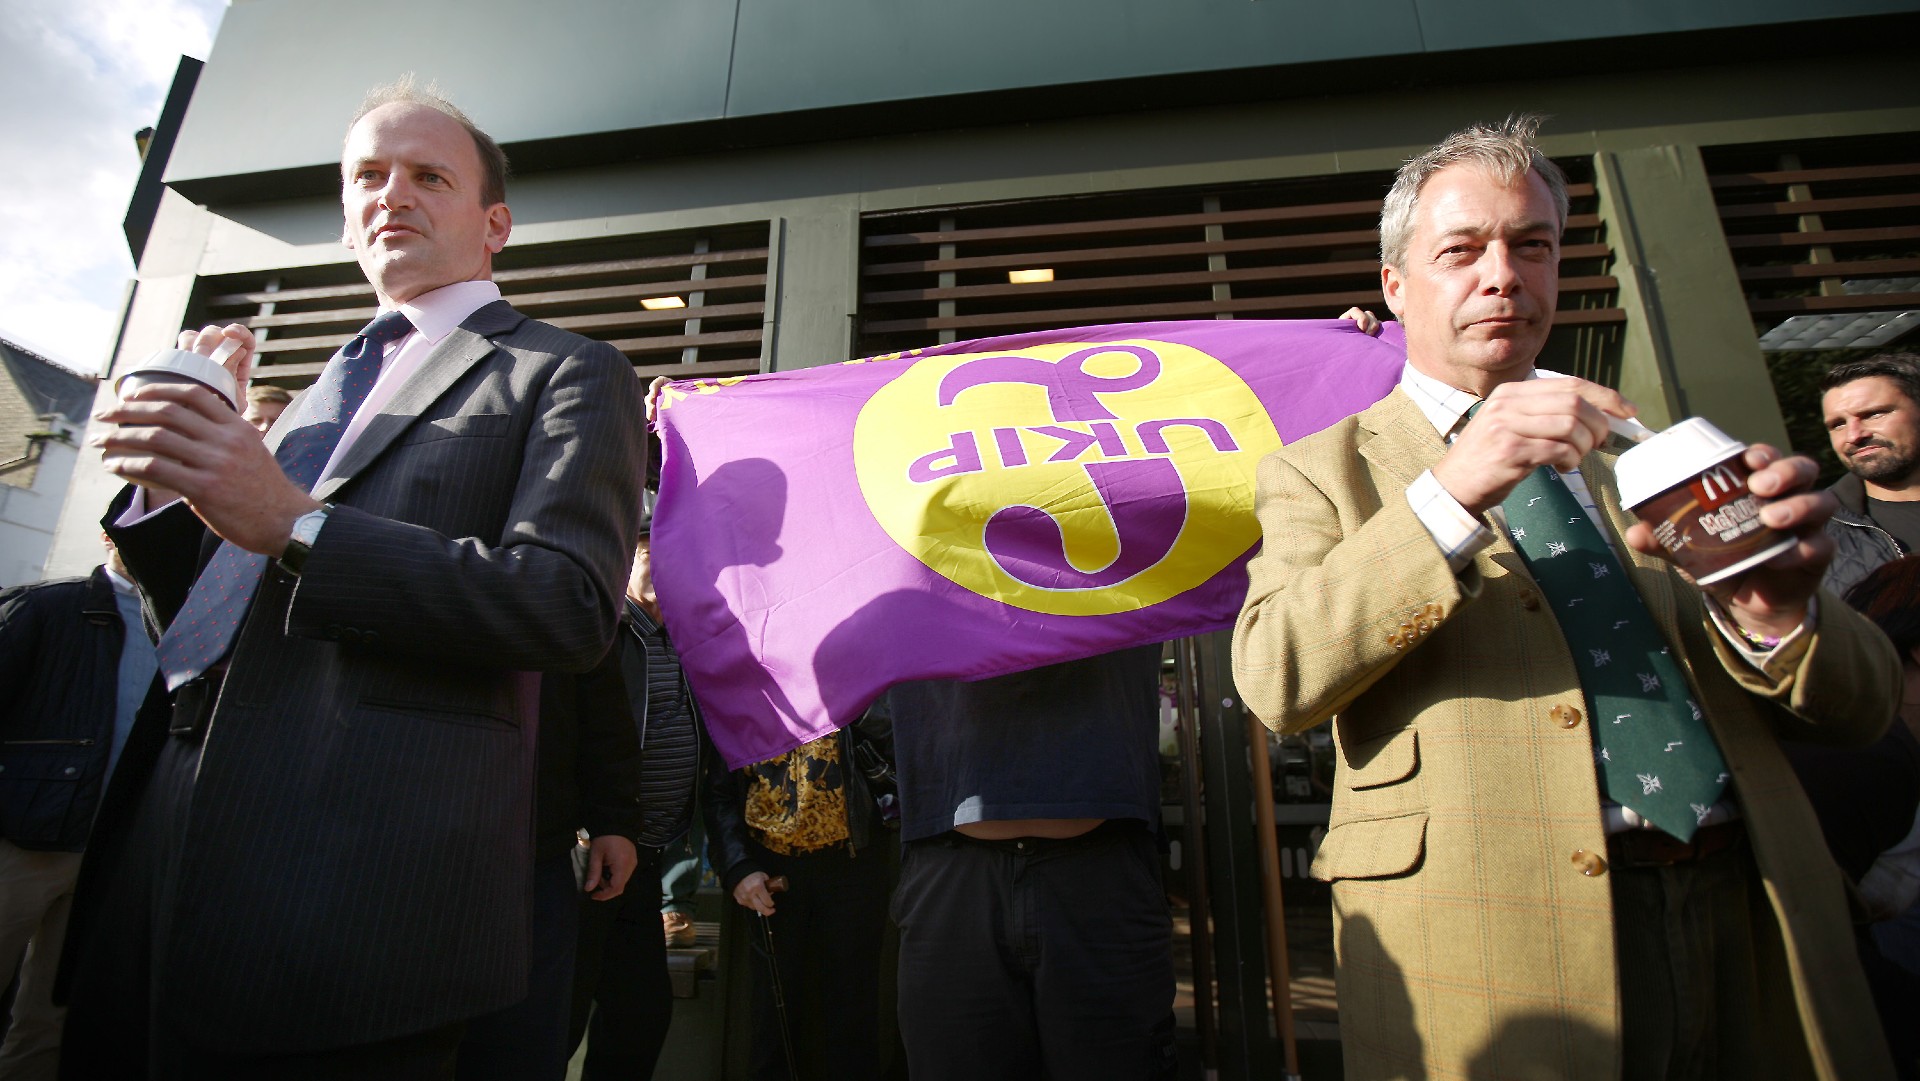 Douglas Carswell with Nigel Farage after defecting to UKIP in 2014